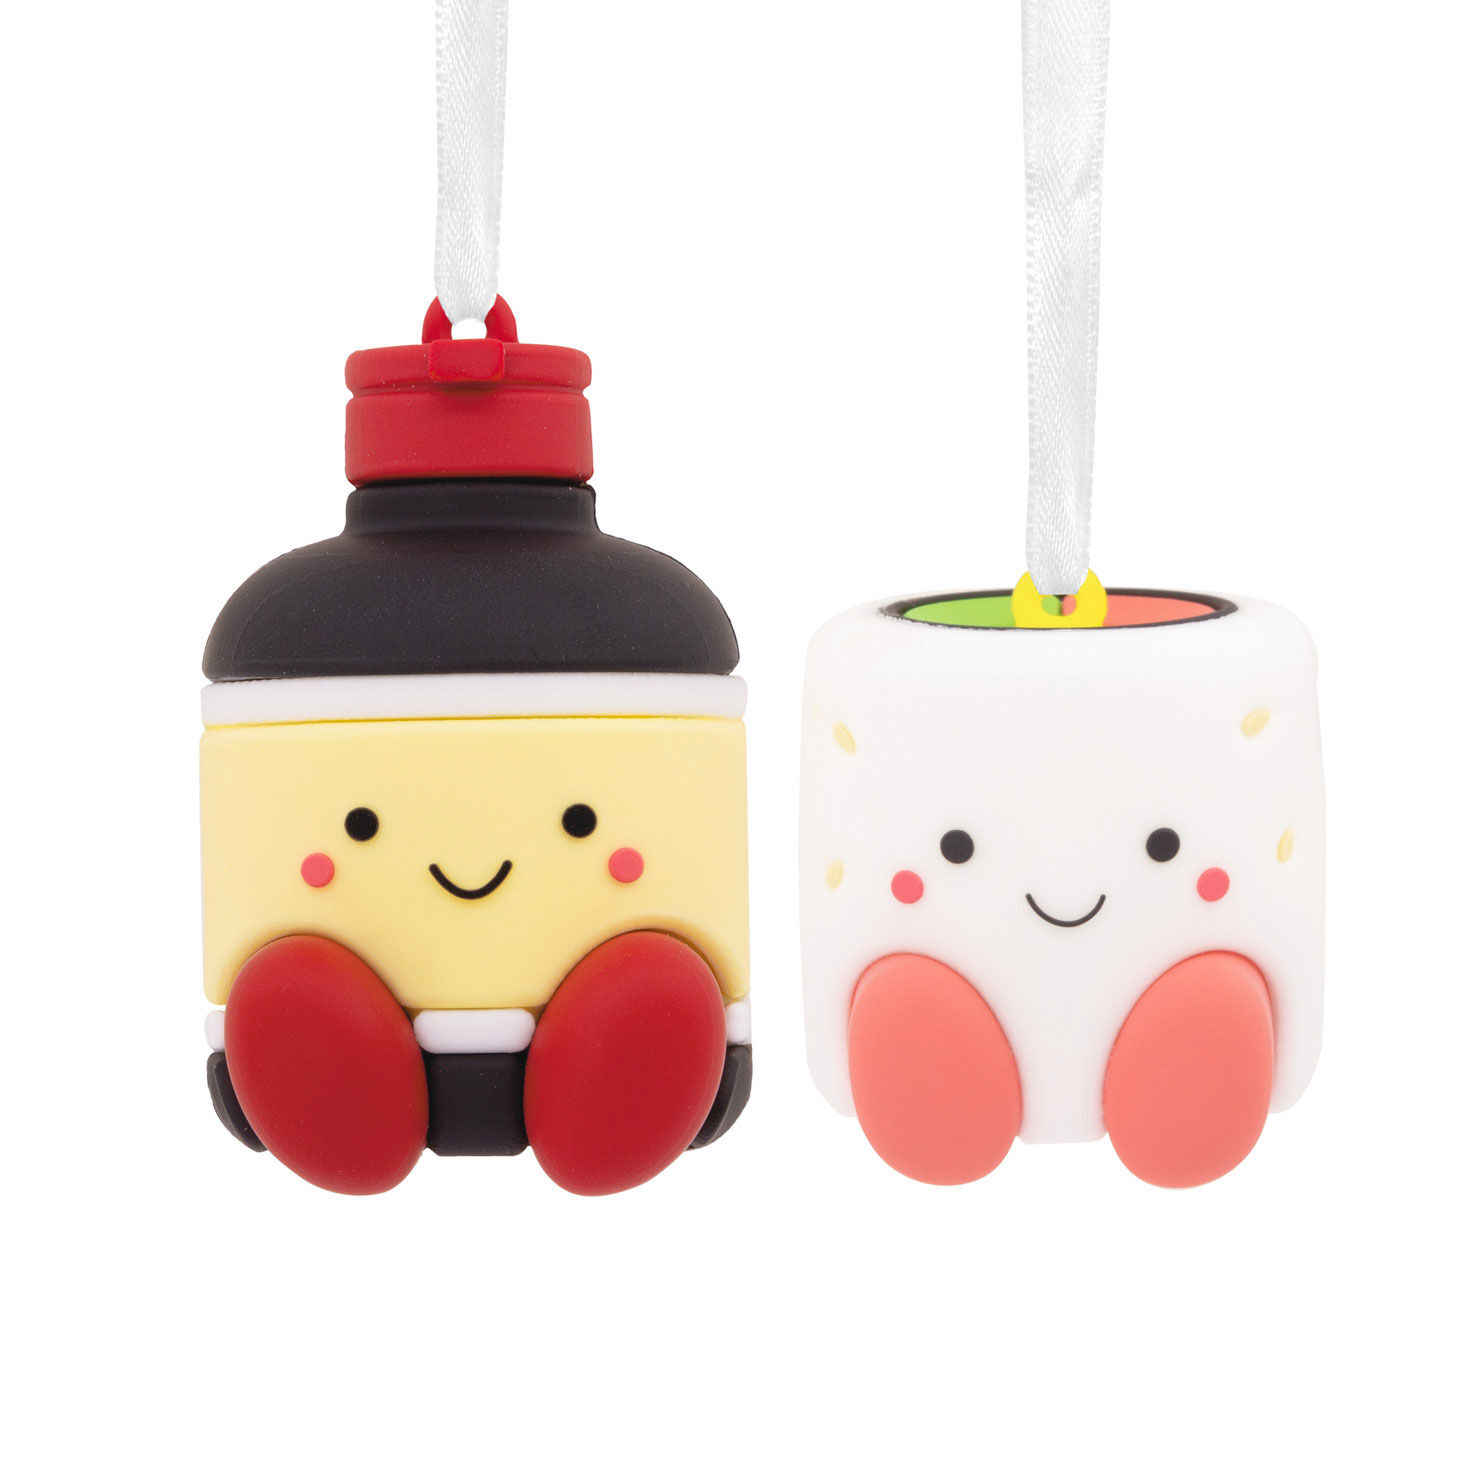 Better Together Sushi and Soy Sauce Magnetic Hallmark Ornaments, Set of 2 for only USD 9.99 | Hallmark